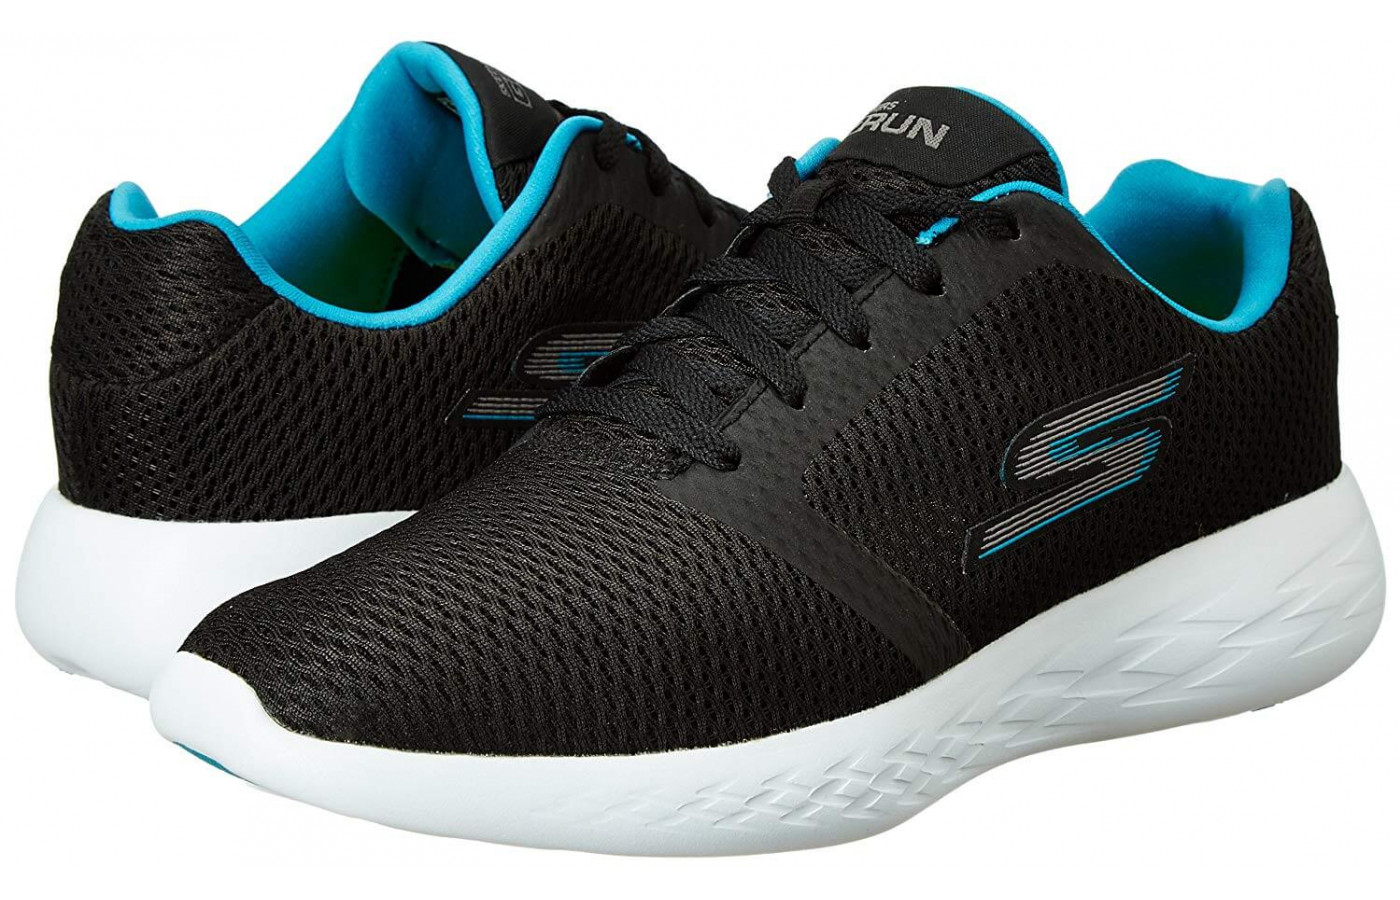 Sketchers GOrun 600 Refine double angled side view